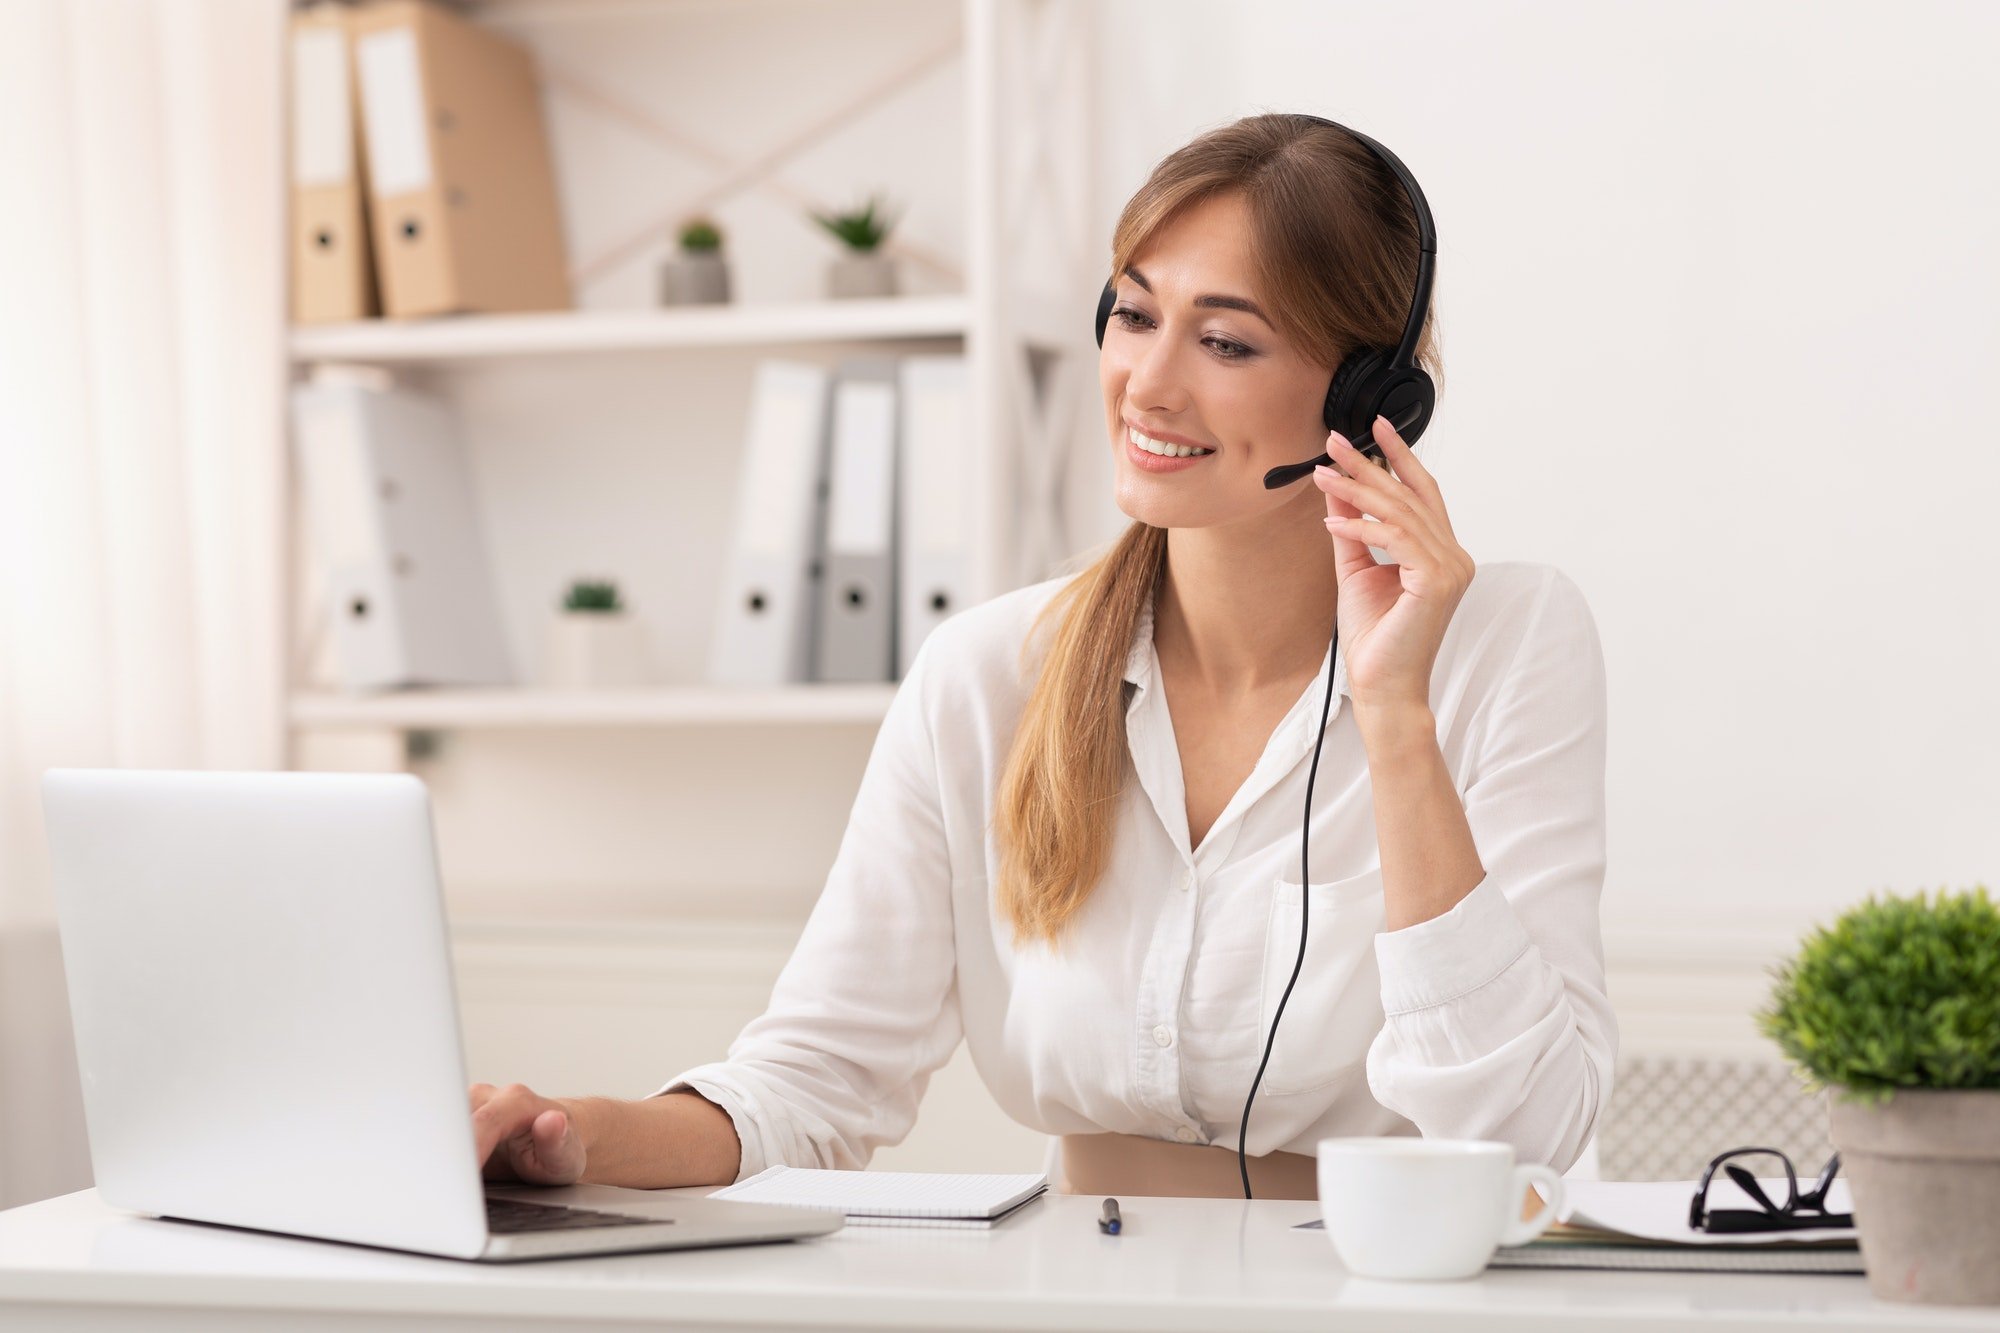 Entrepreneur Lady In Headset Making Video Call Sitting In Office